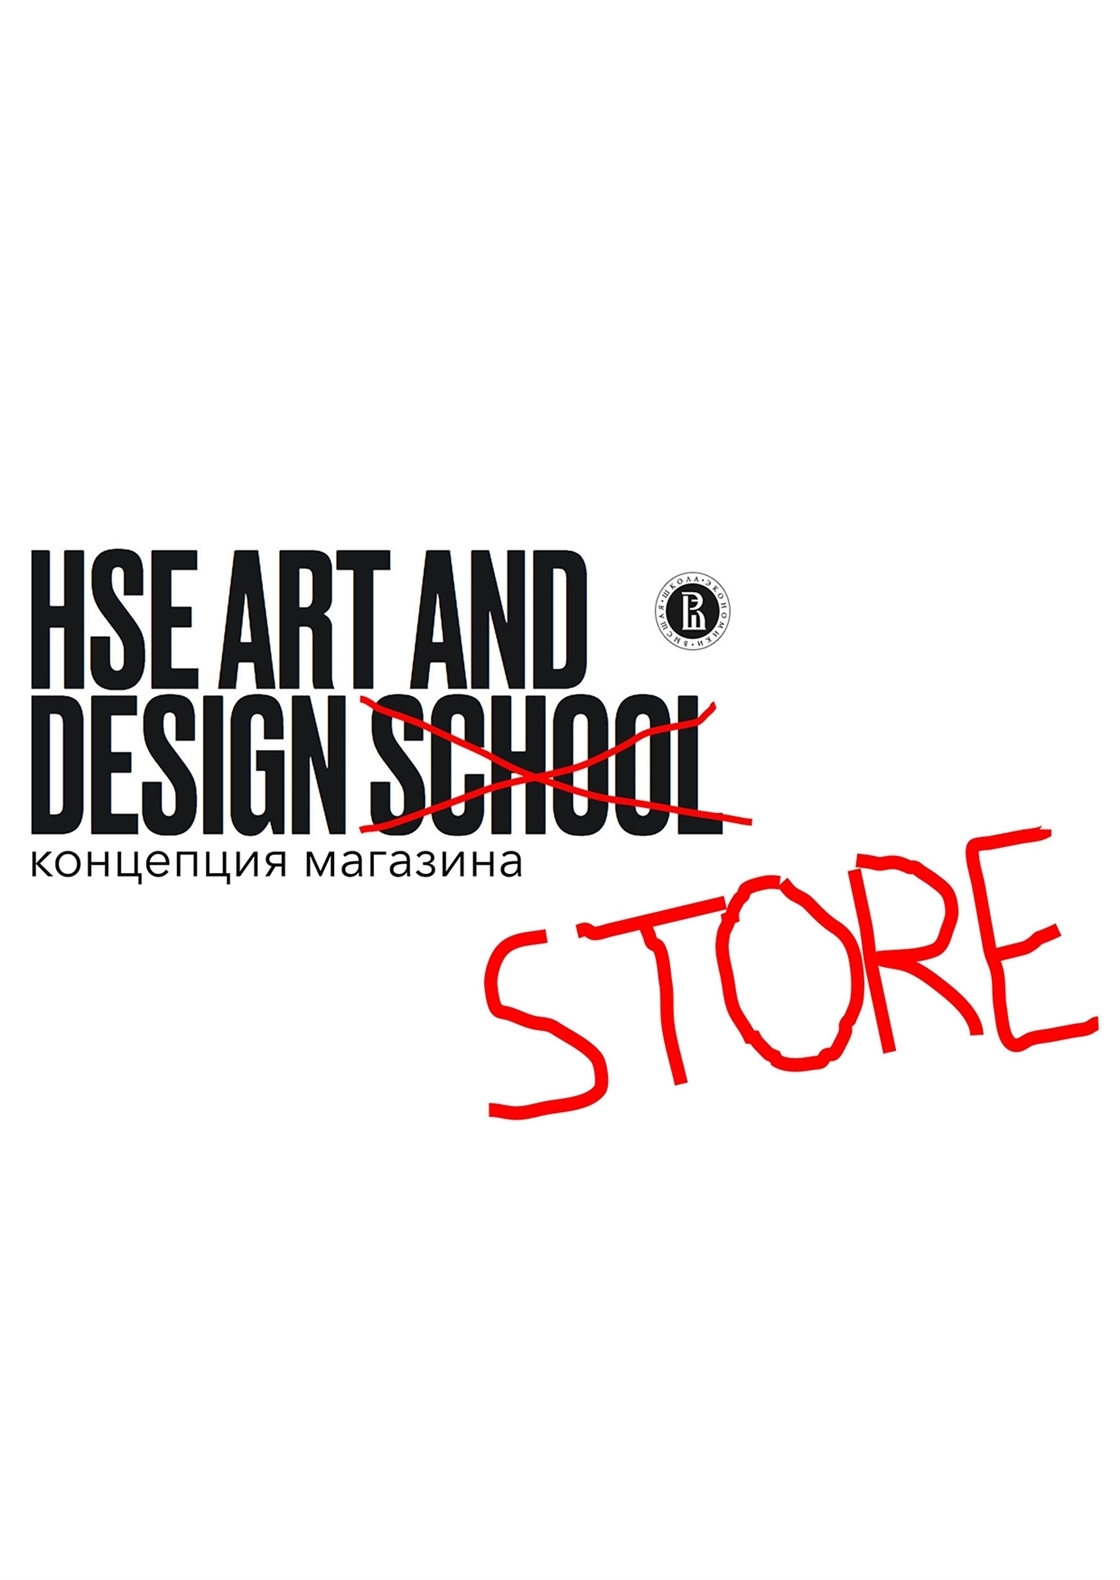 Hse art and design